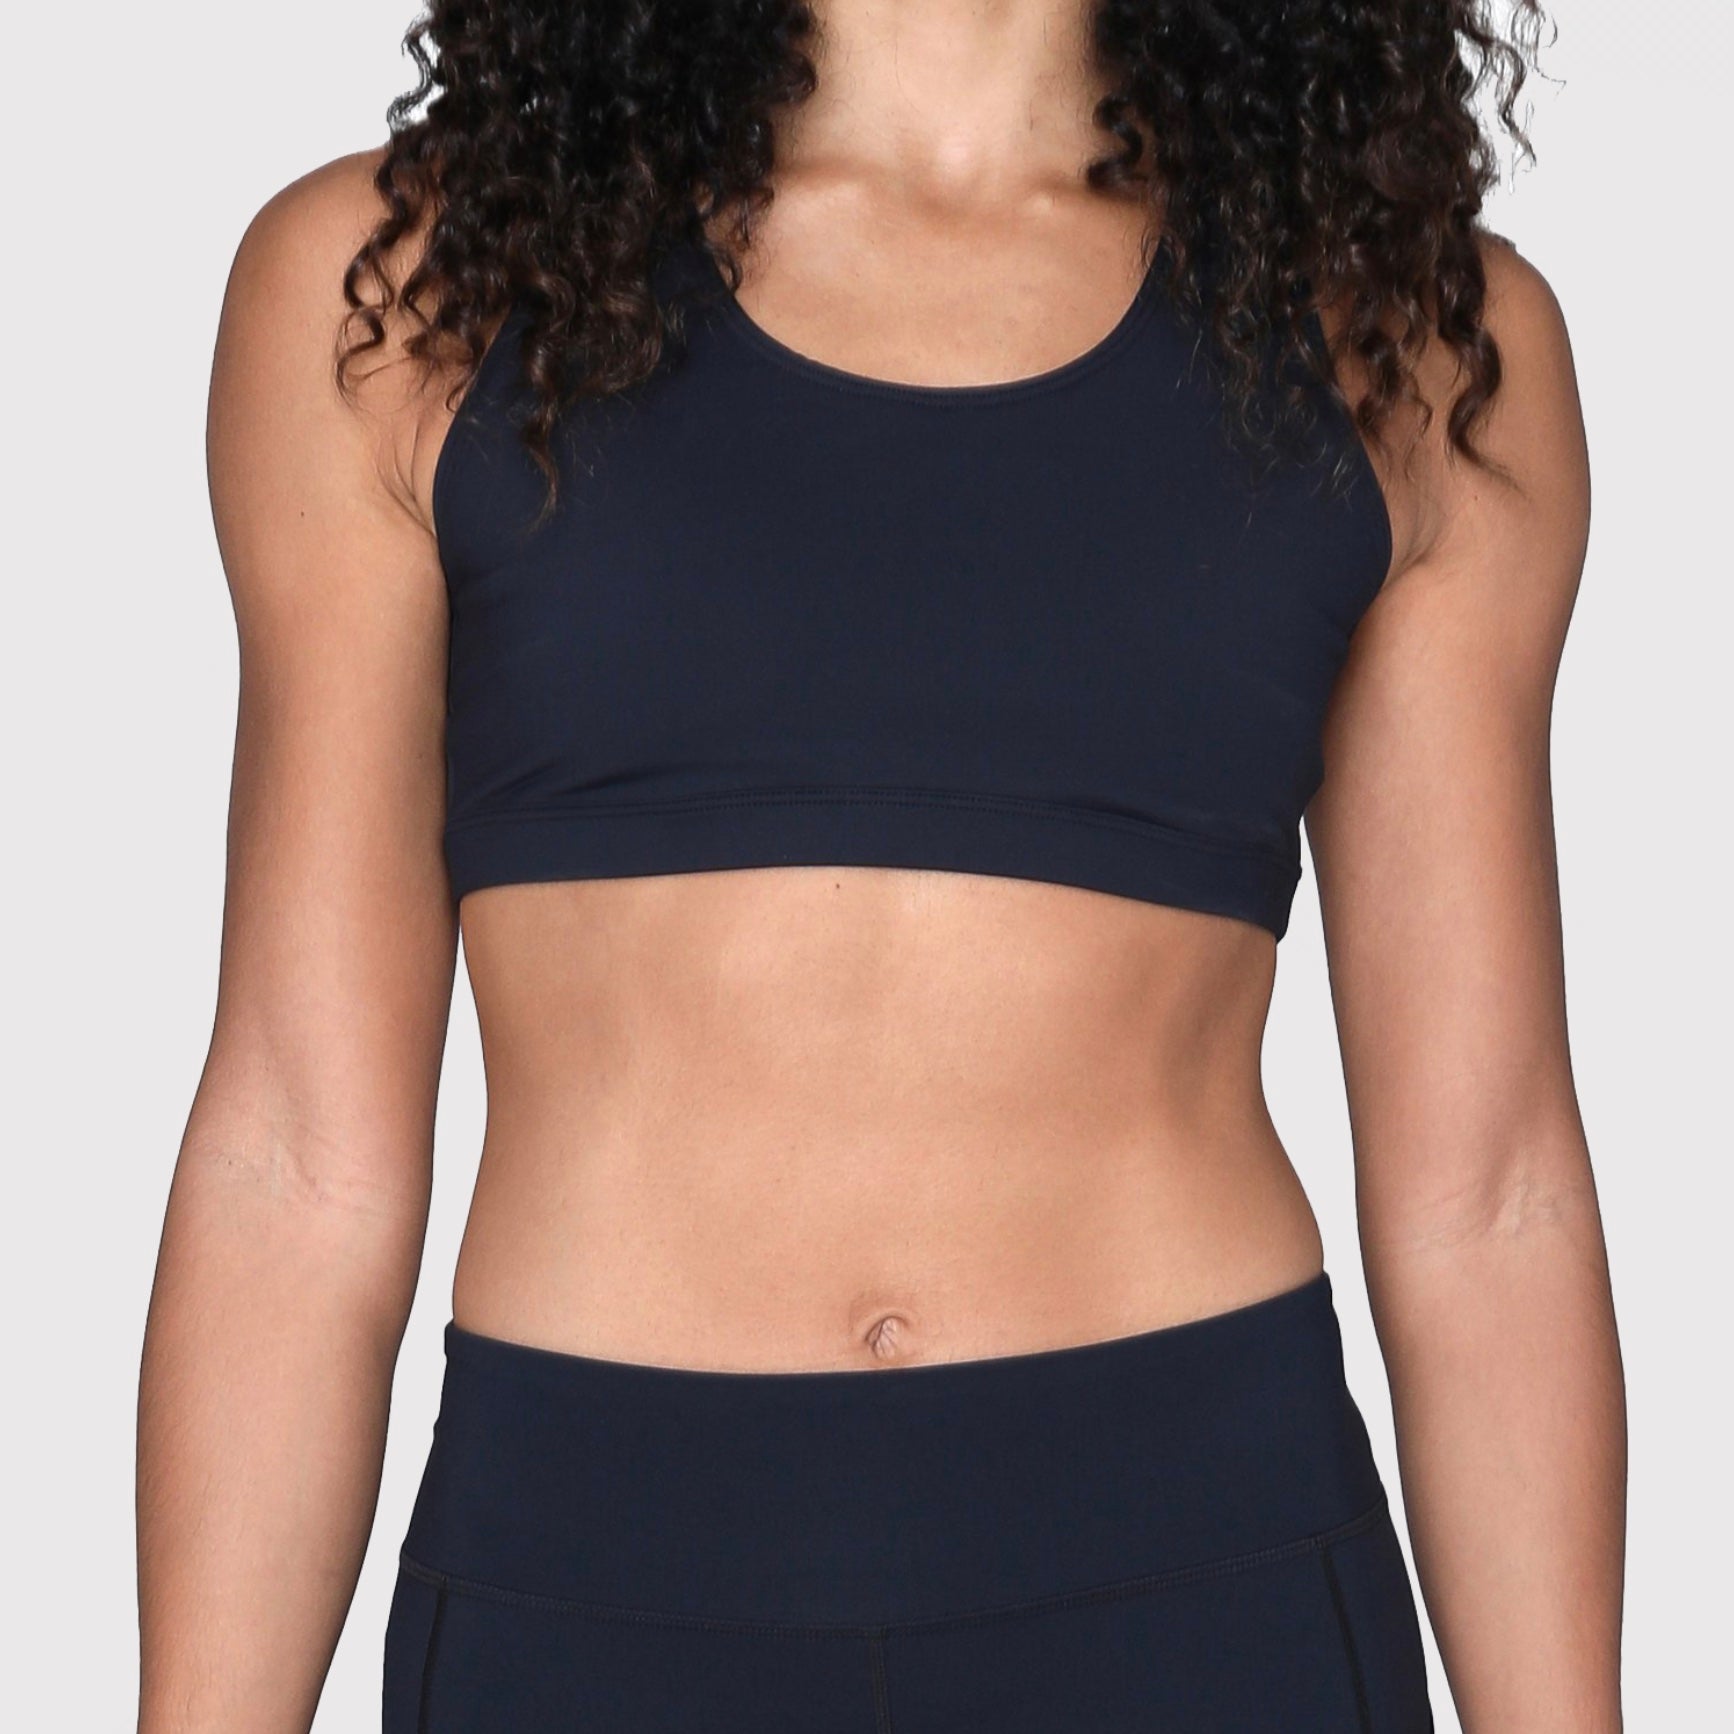 6 Lululemon Sports Bras That Are on Sale for Under $40 Right Now